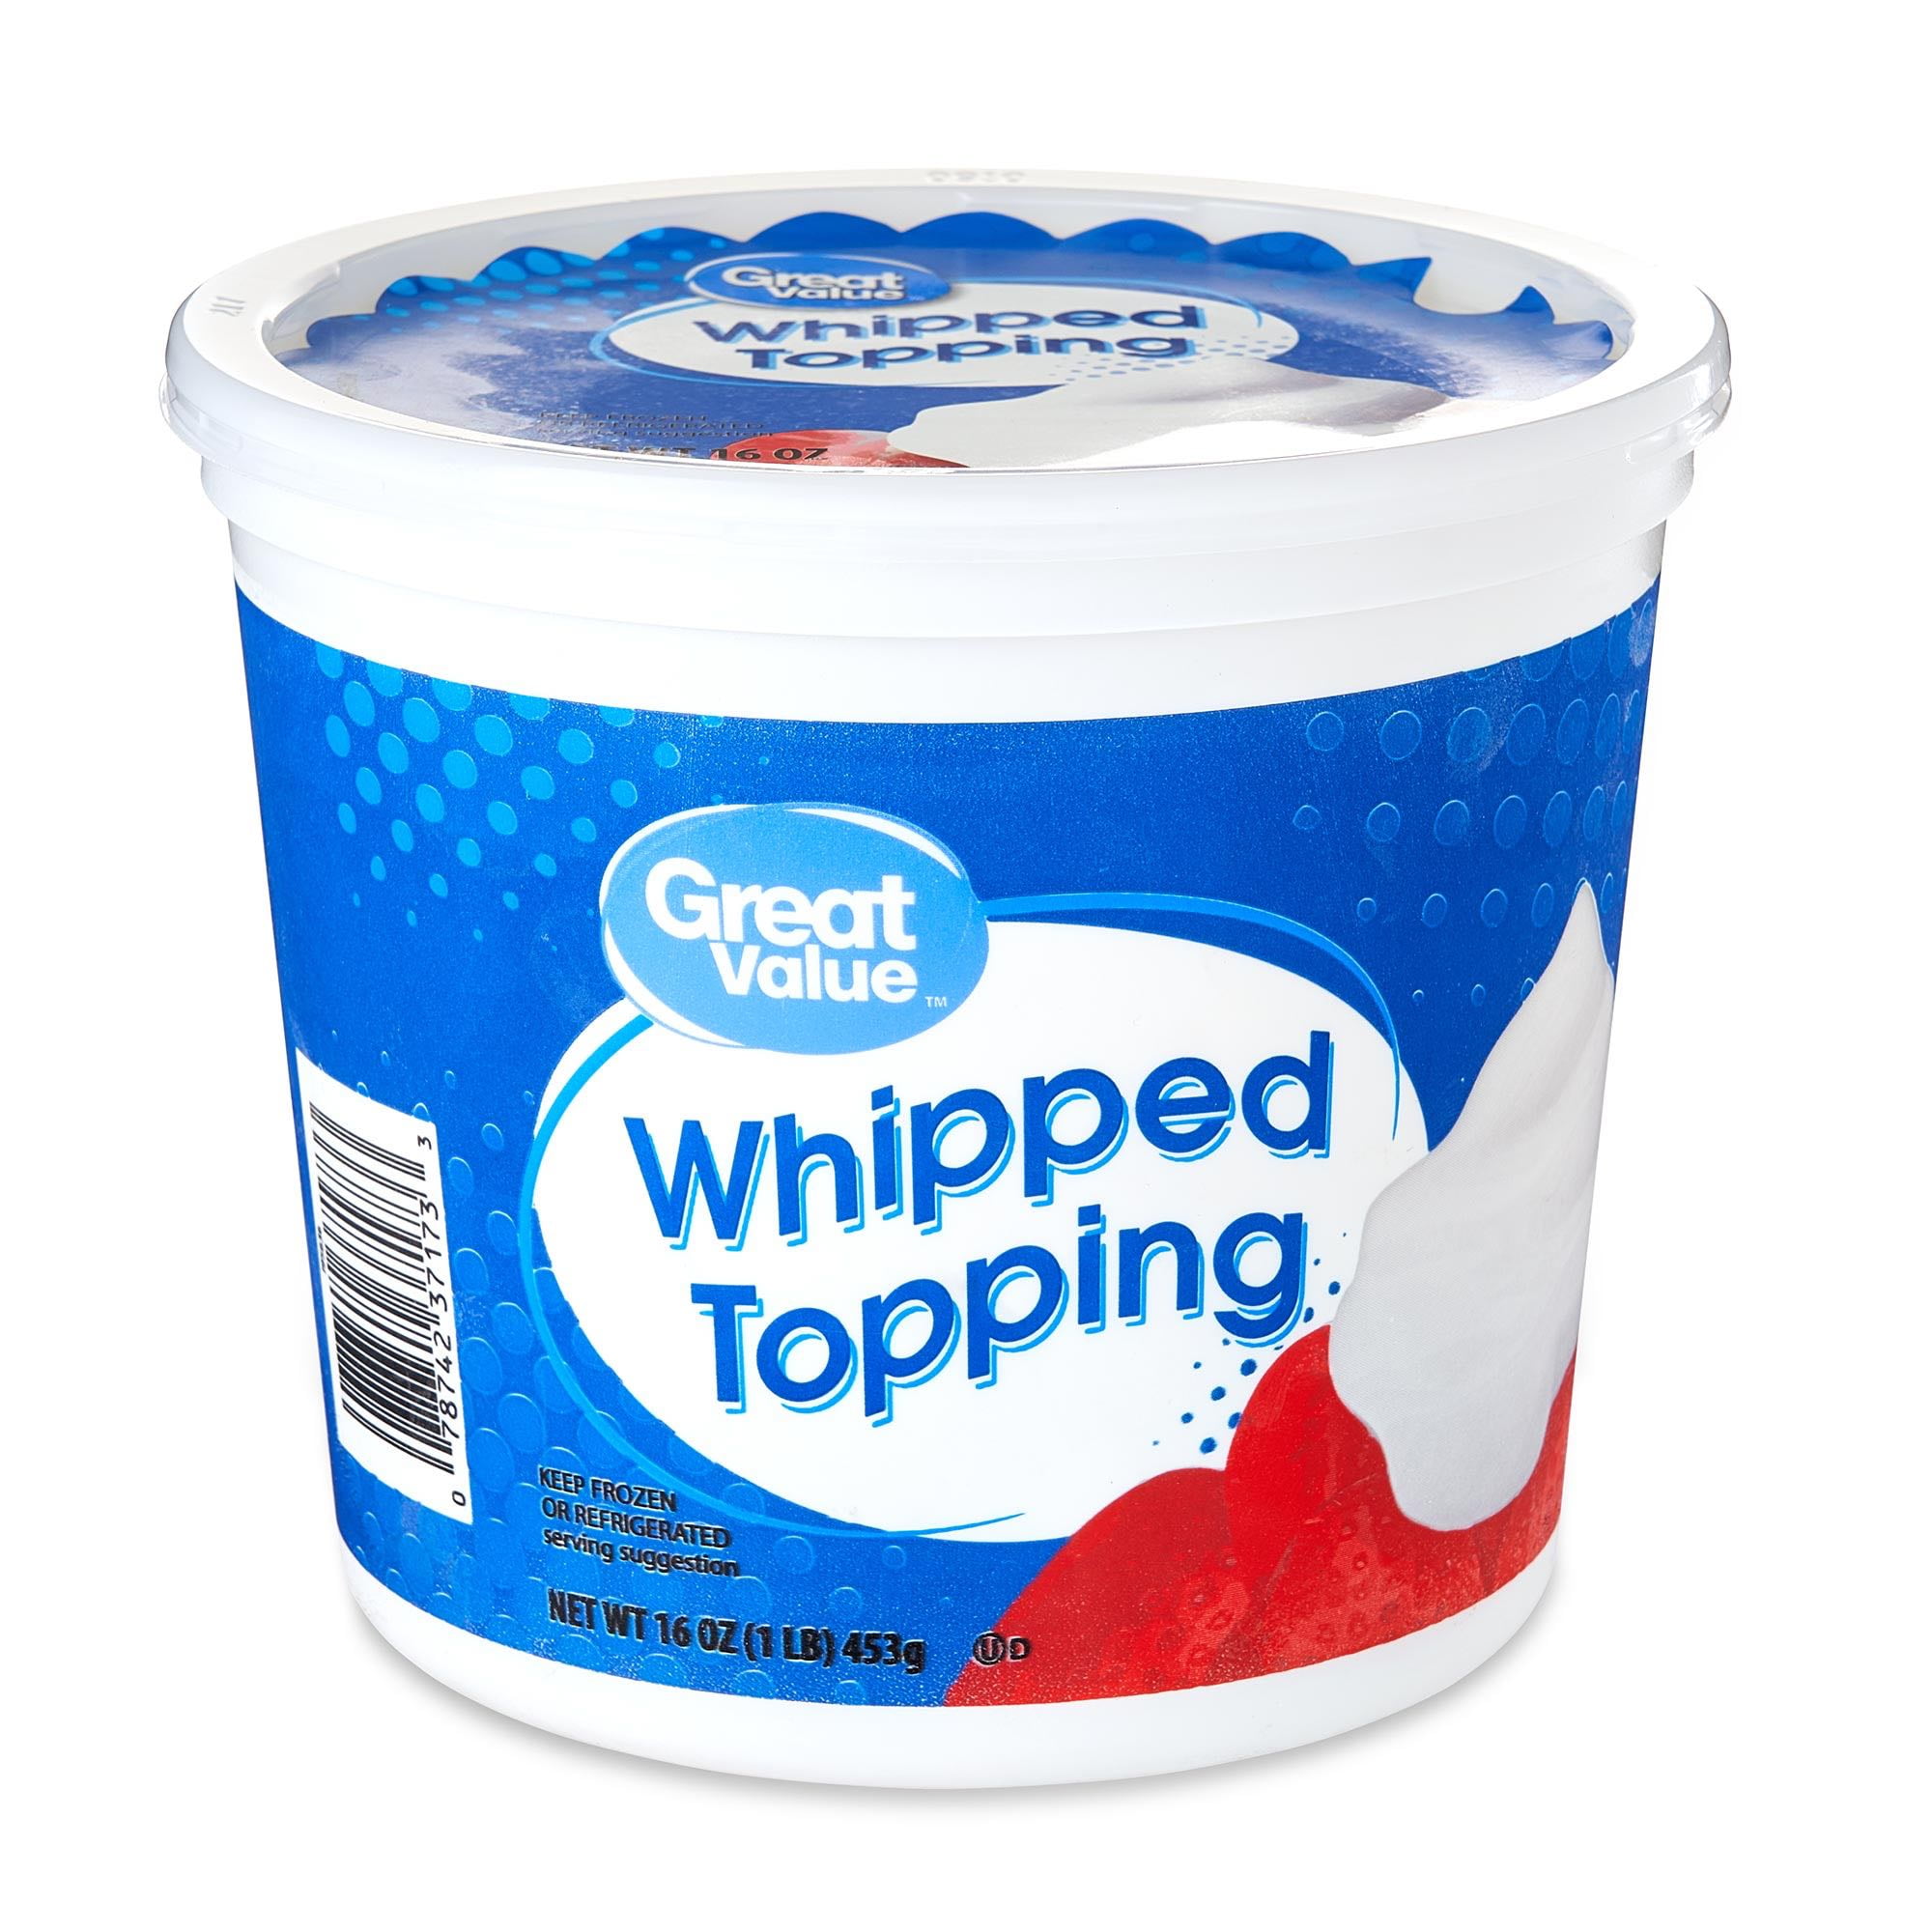 Great Value Frozen Whipped Topping, 16 oz Container -